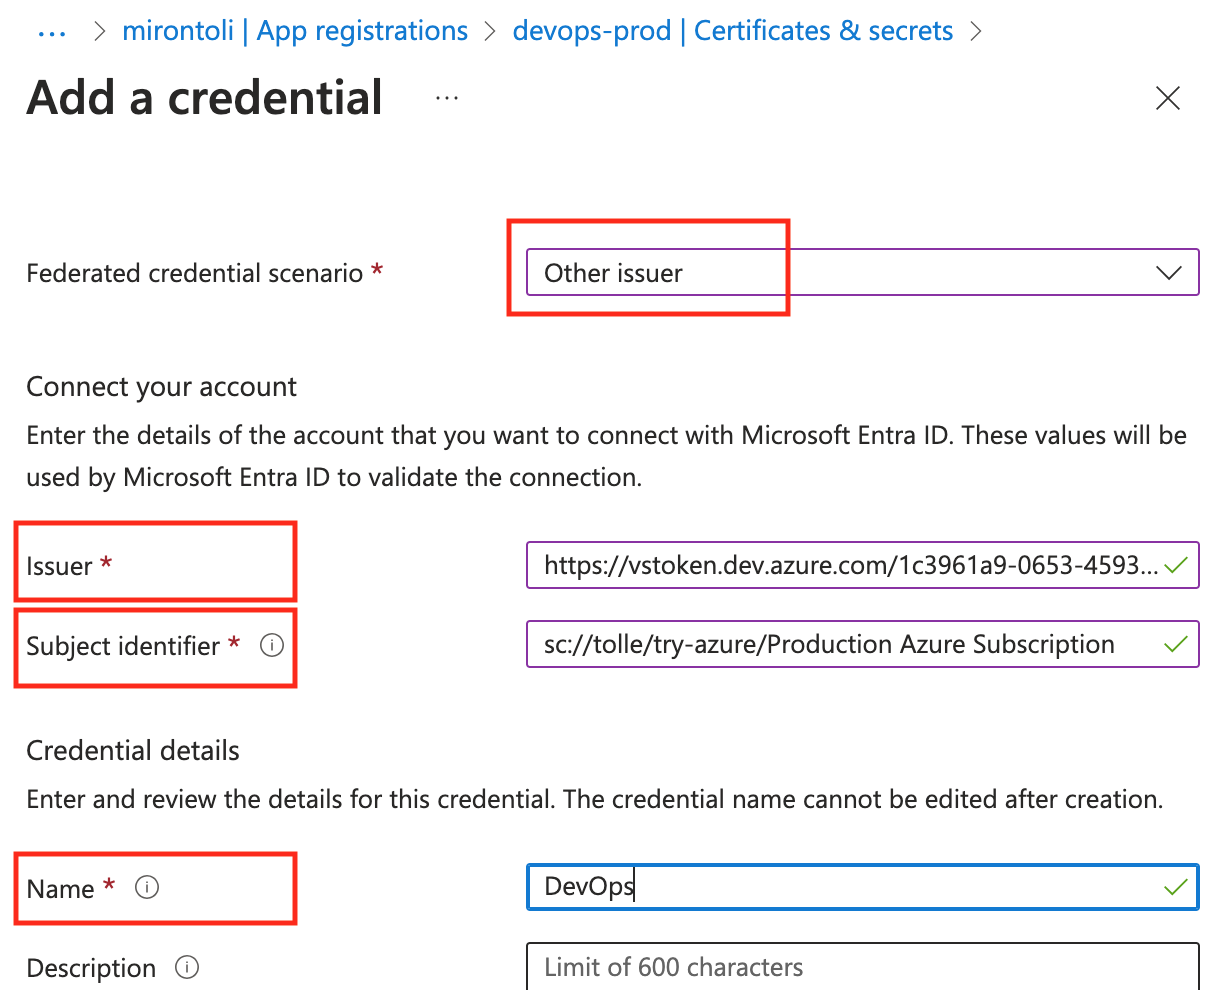 Copying details for federated credential